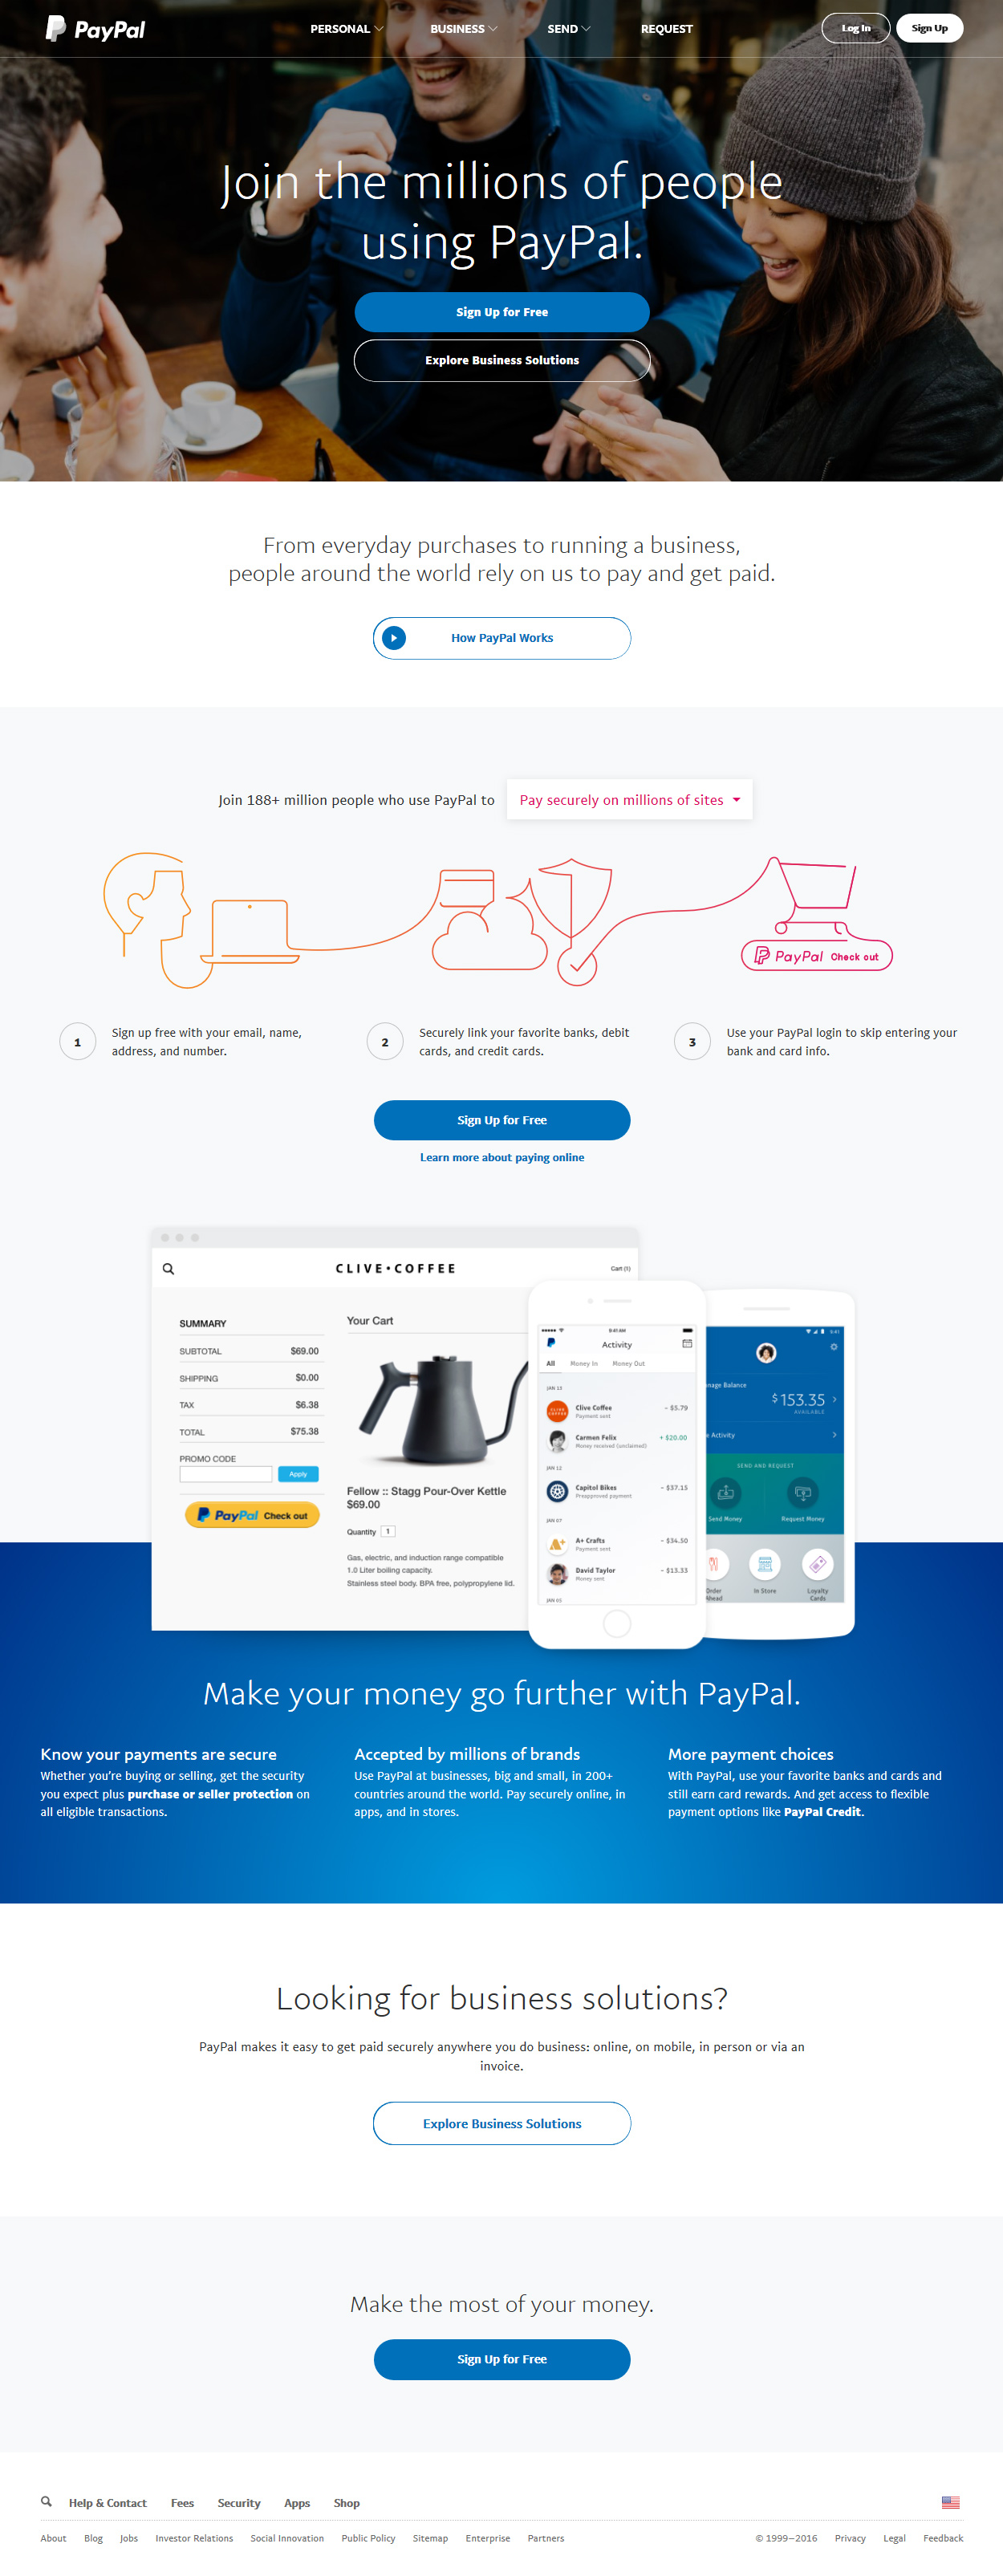 PayPal in 2016